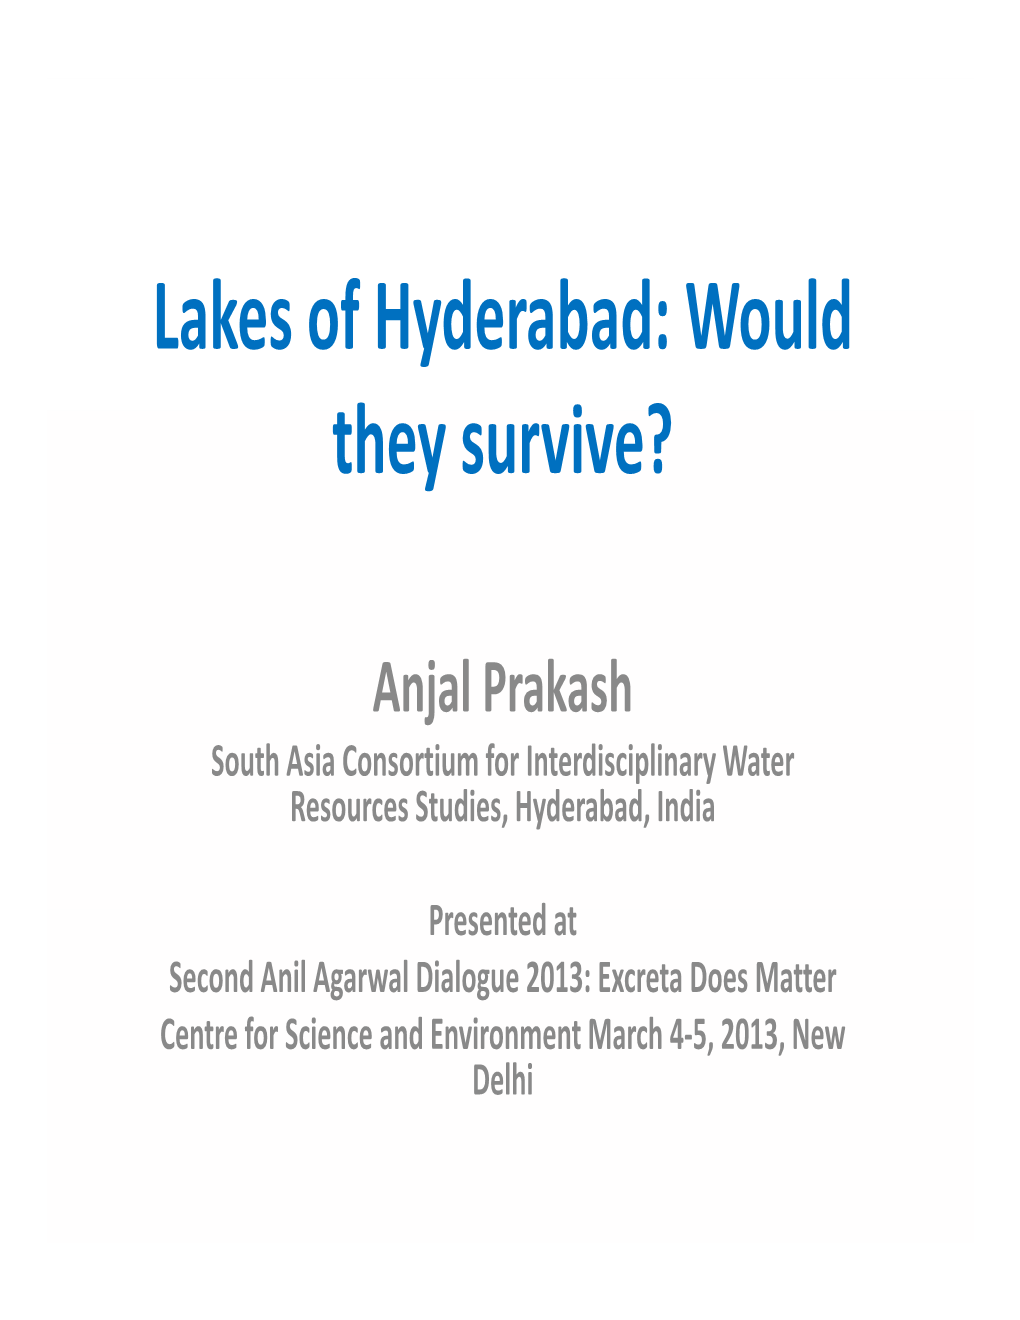 Lakes of Hyderabad: Would They Survi?Ive?